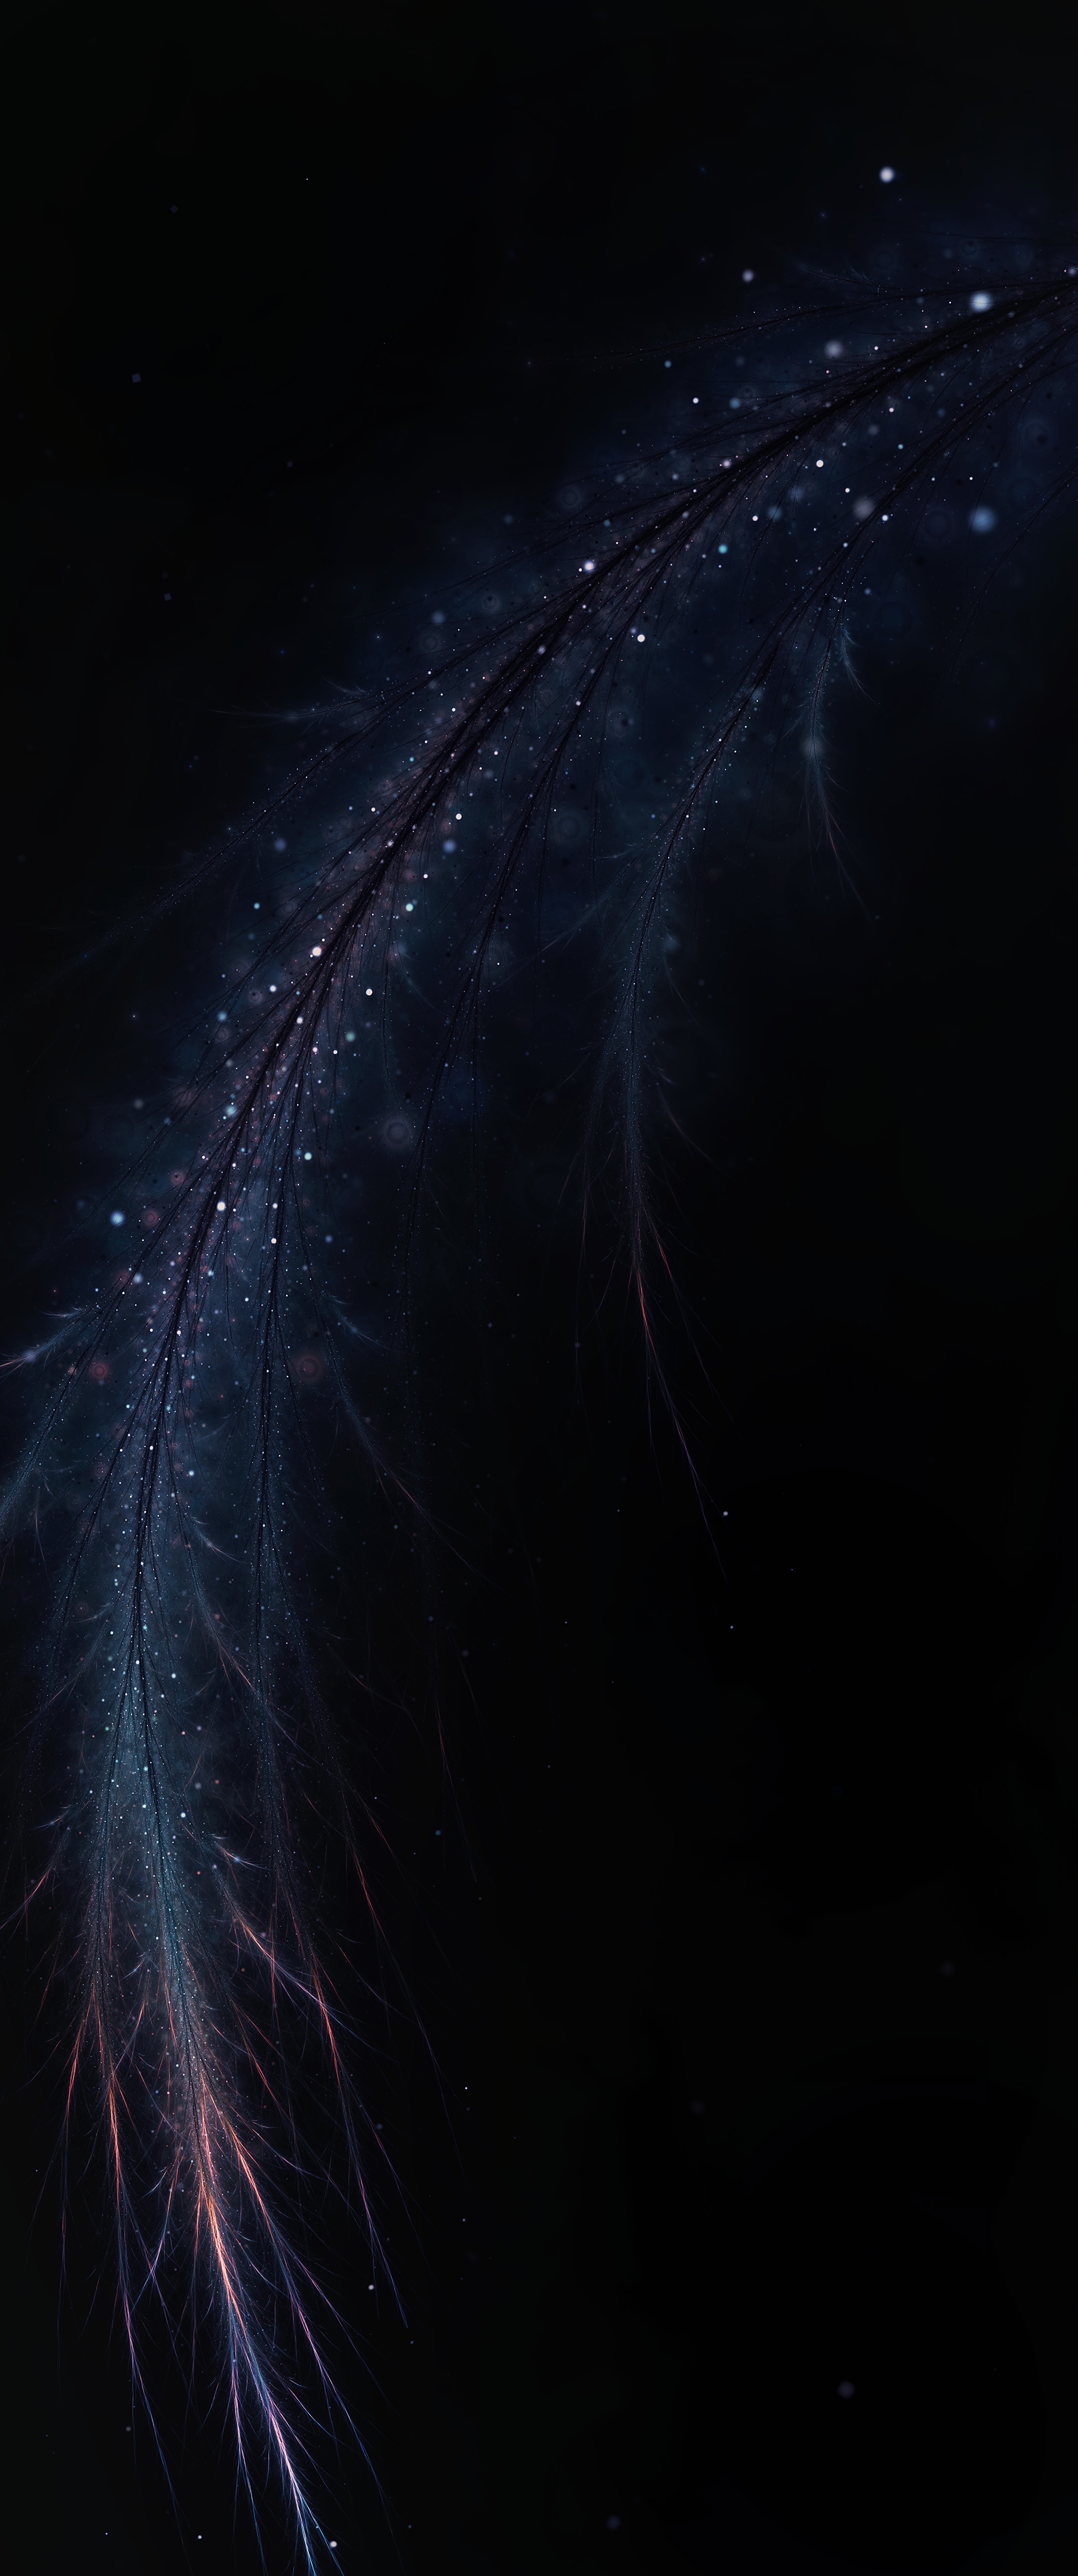 dark, abstract, feather, fractal, shine, brilliance, branch, pen iphone wallpaper